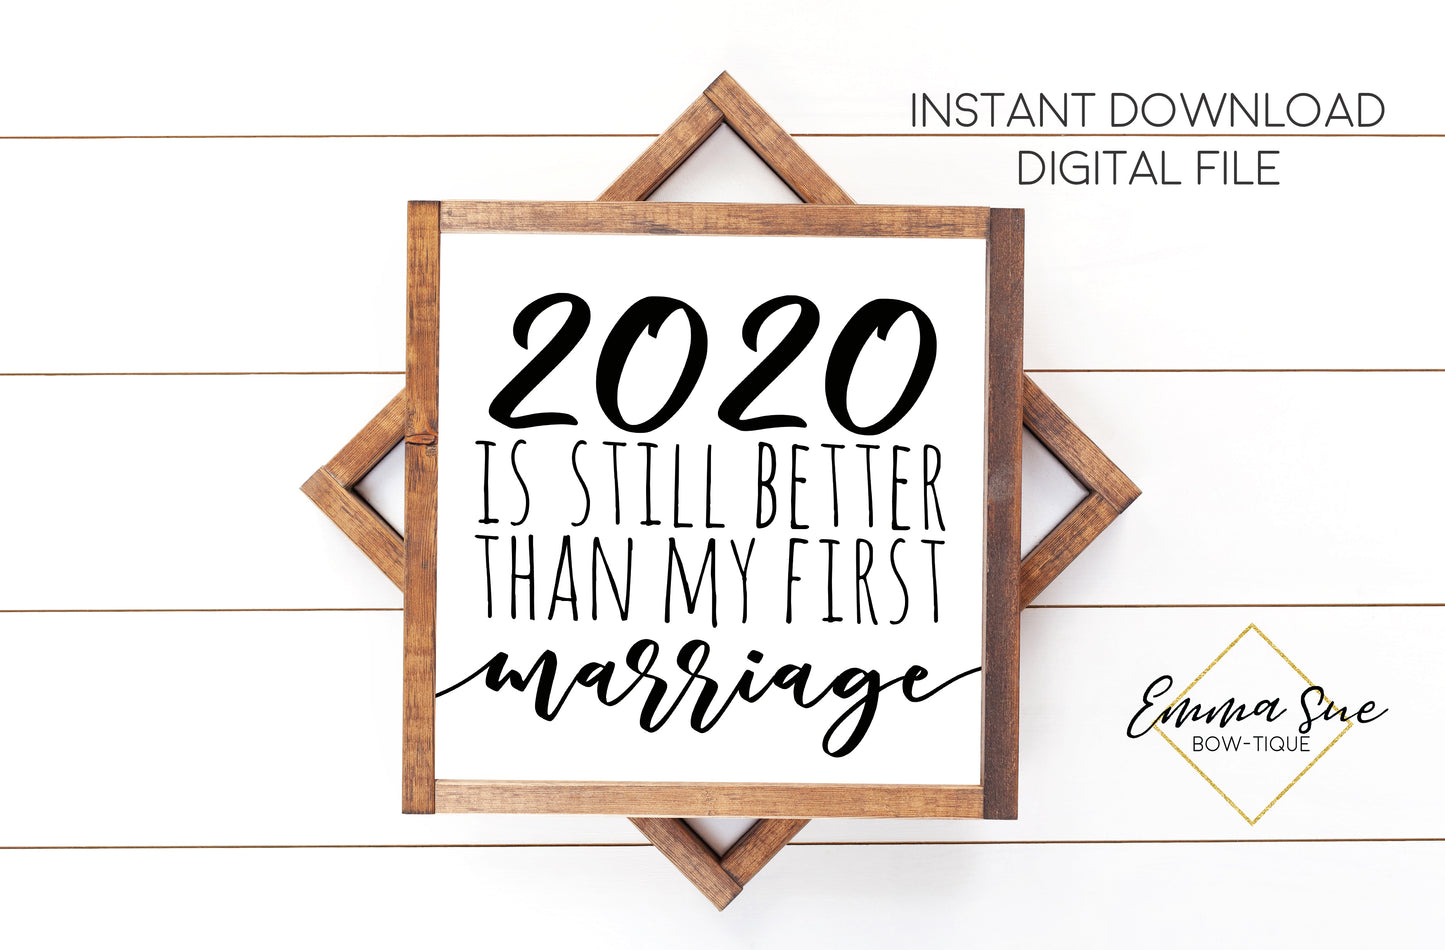 2020 is still better than my first marriage - Funny Divorce Quotes Farmhouse Printable Sign Wall Art - Digital File